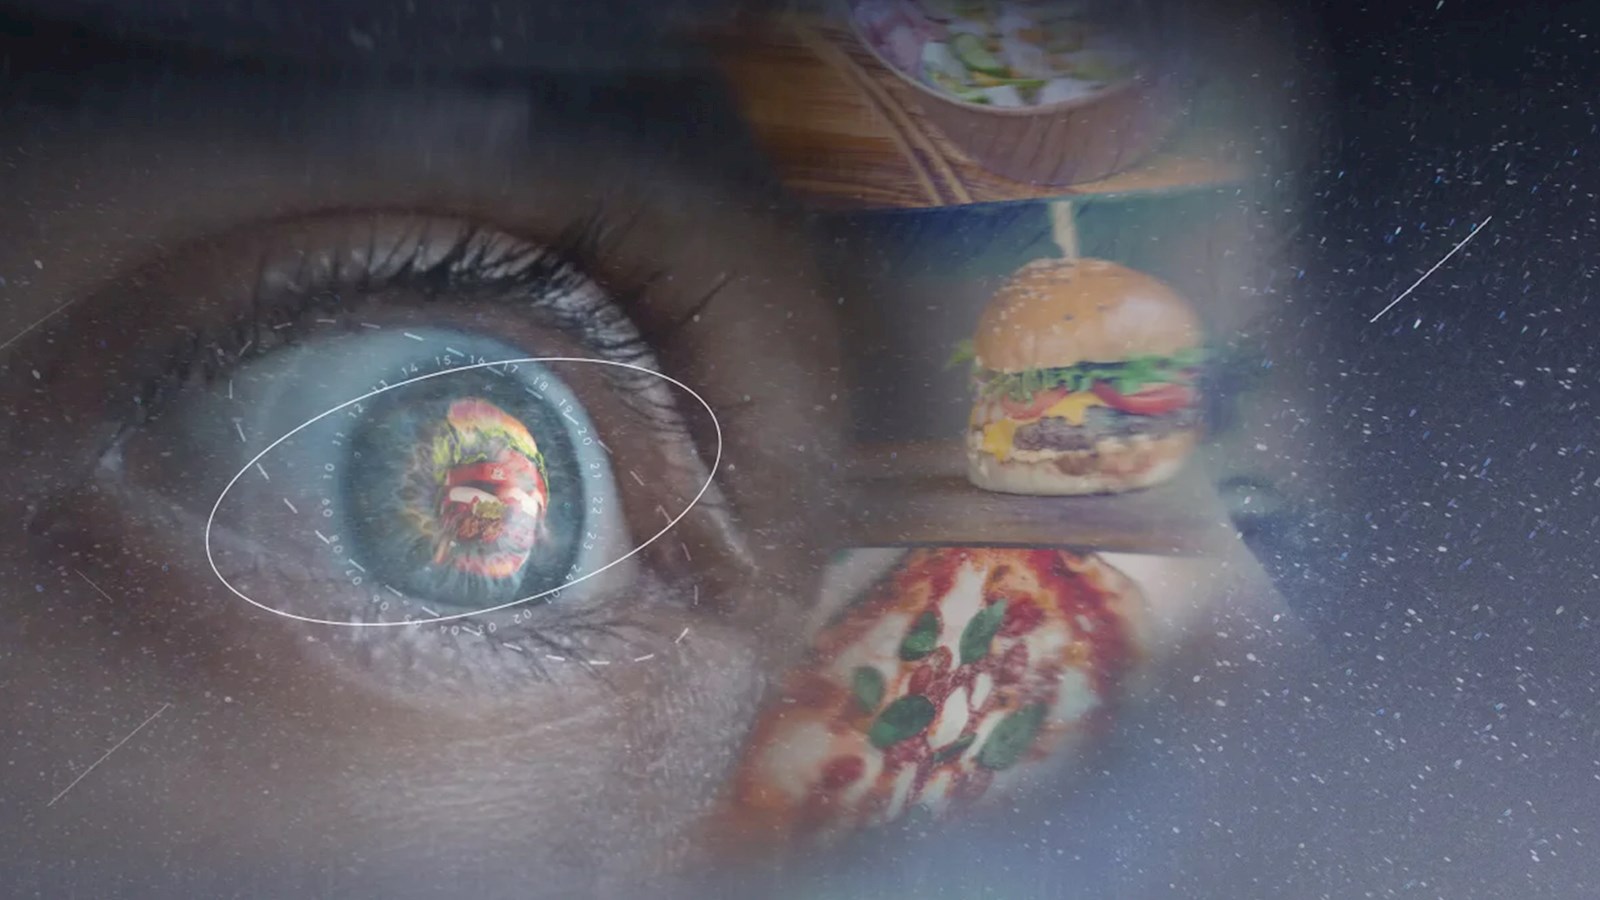 An eye looking at a universe filled with food